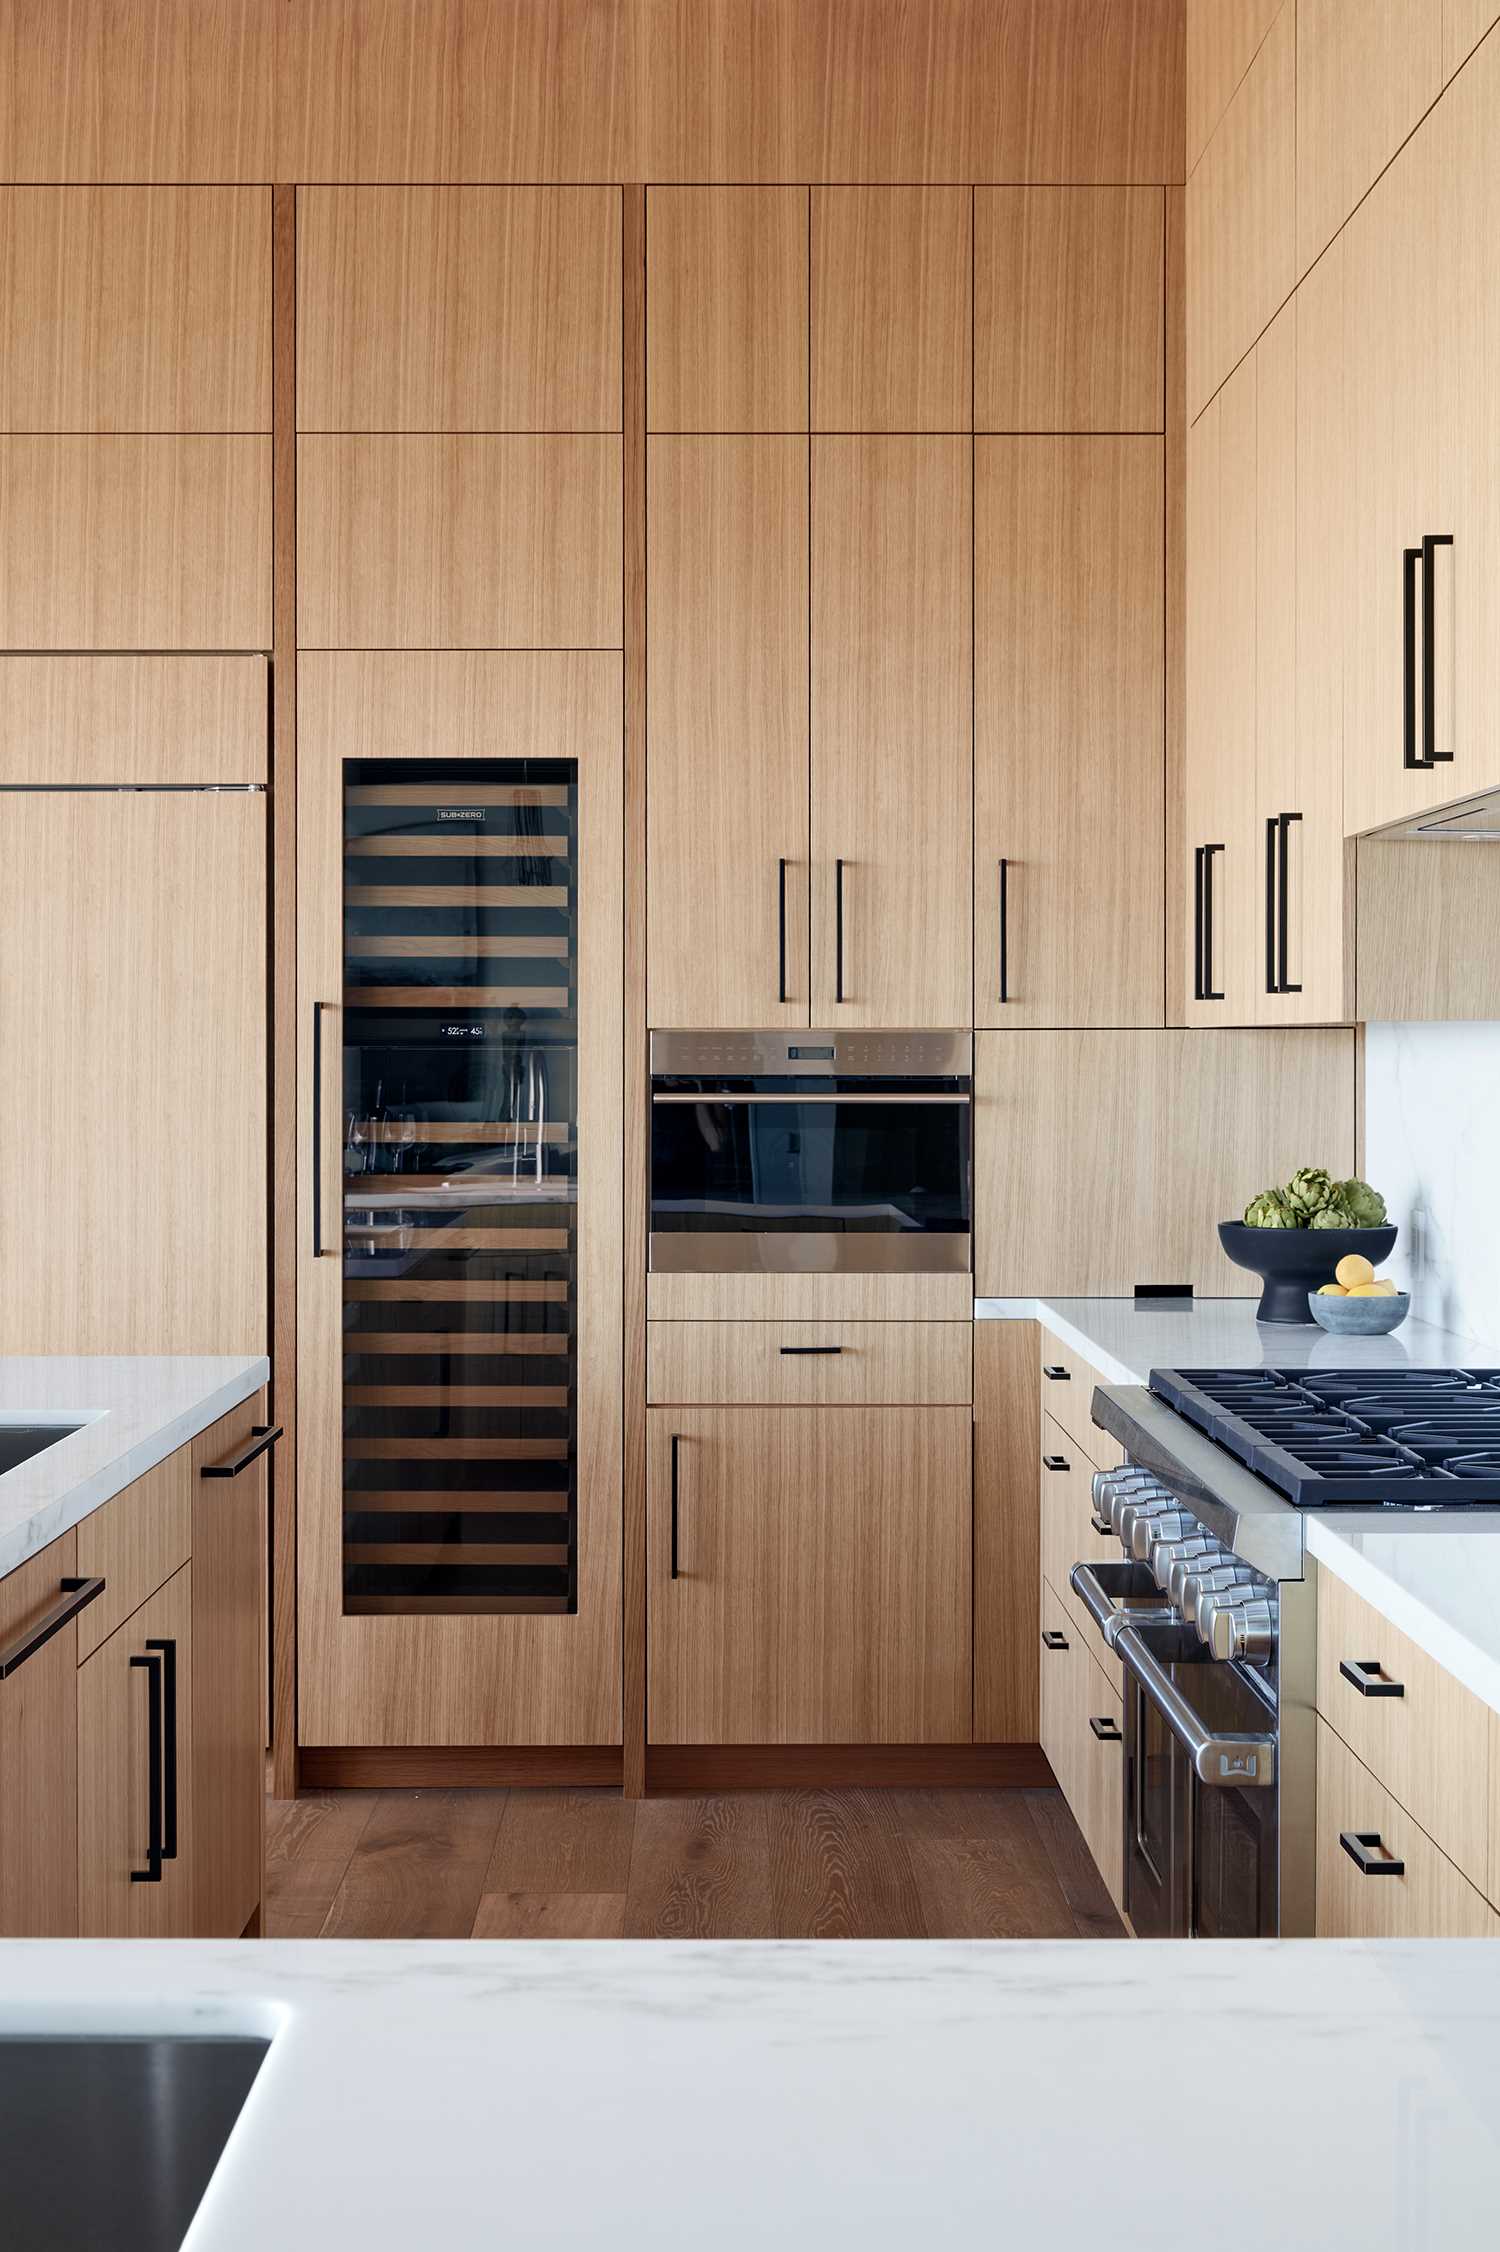 A modern wood kitchen with white countertops.